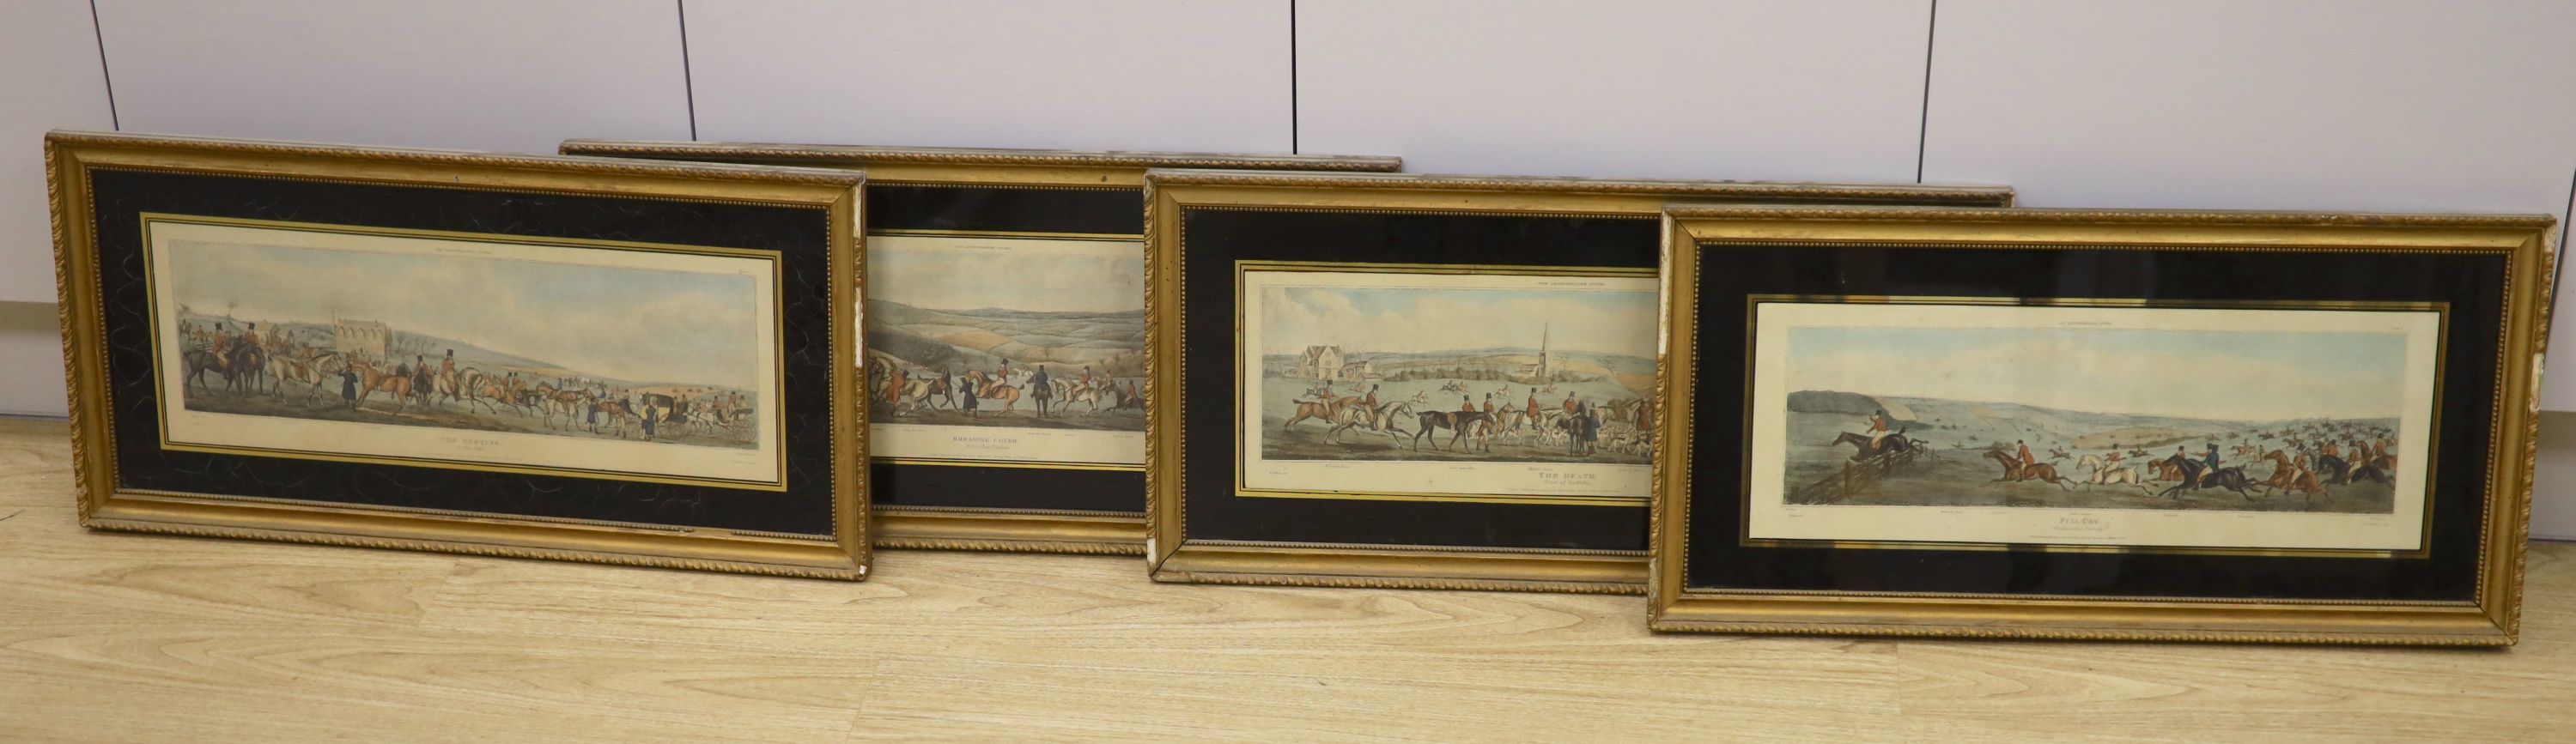 Sutherland after Alken, a set of four coloured engravings, The Leicestershire Covers, hunting scenes, 19 x 53cm, eglomise framed